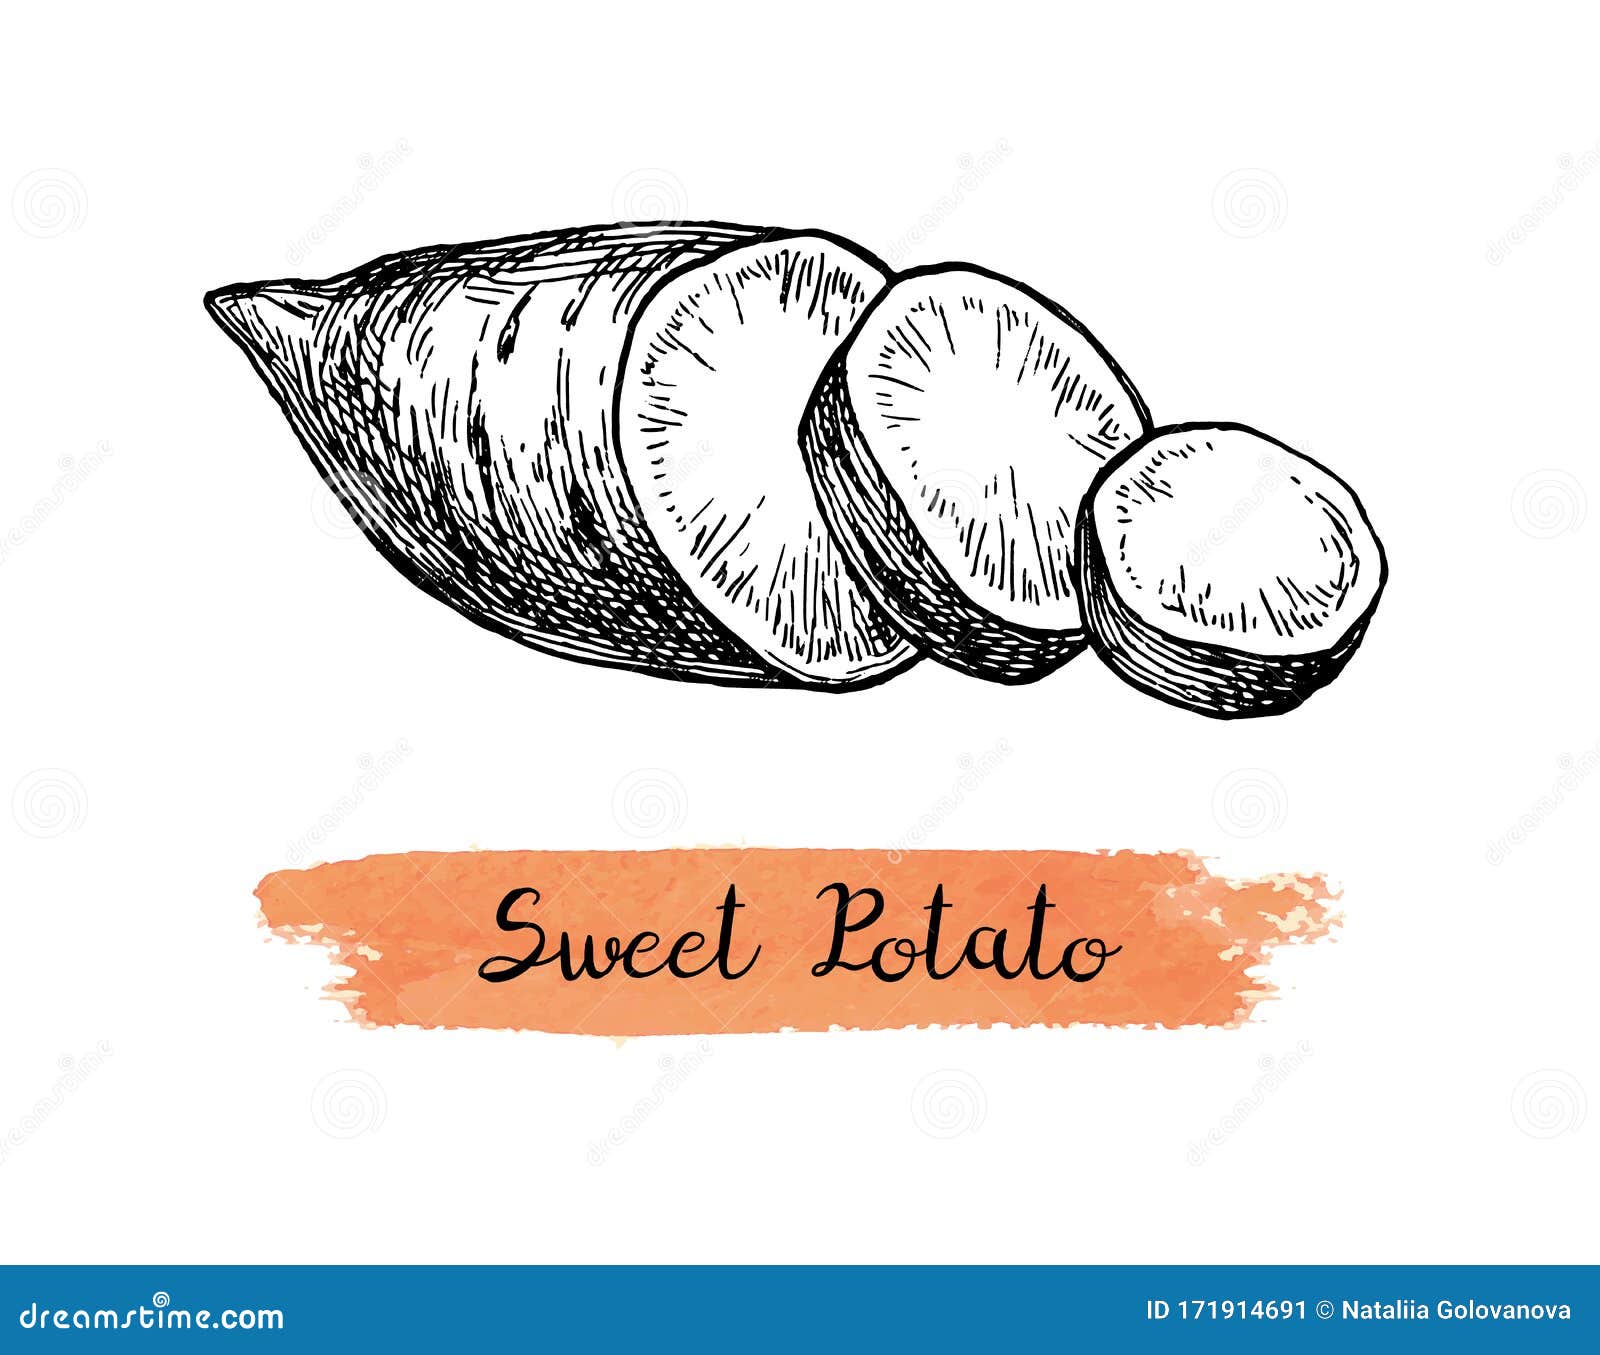 Sweet Potato Yam Outline Vector Sketch  Ubi Black And White PngYam Png   free transparent png images  pngaaacom